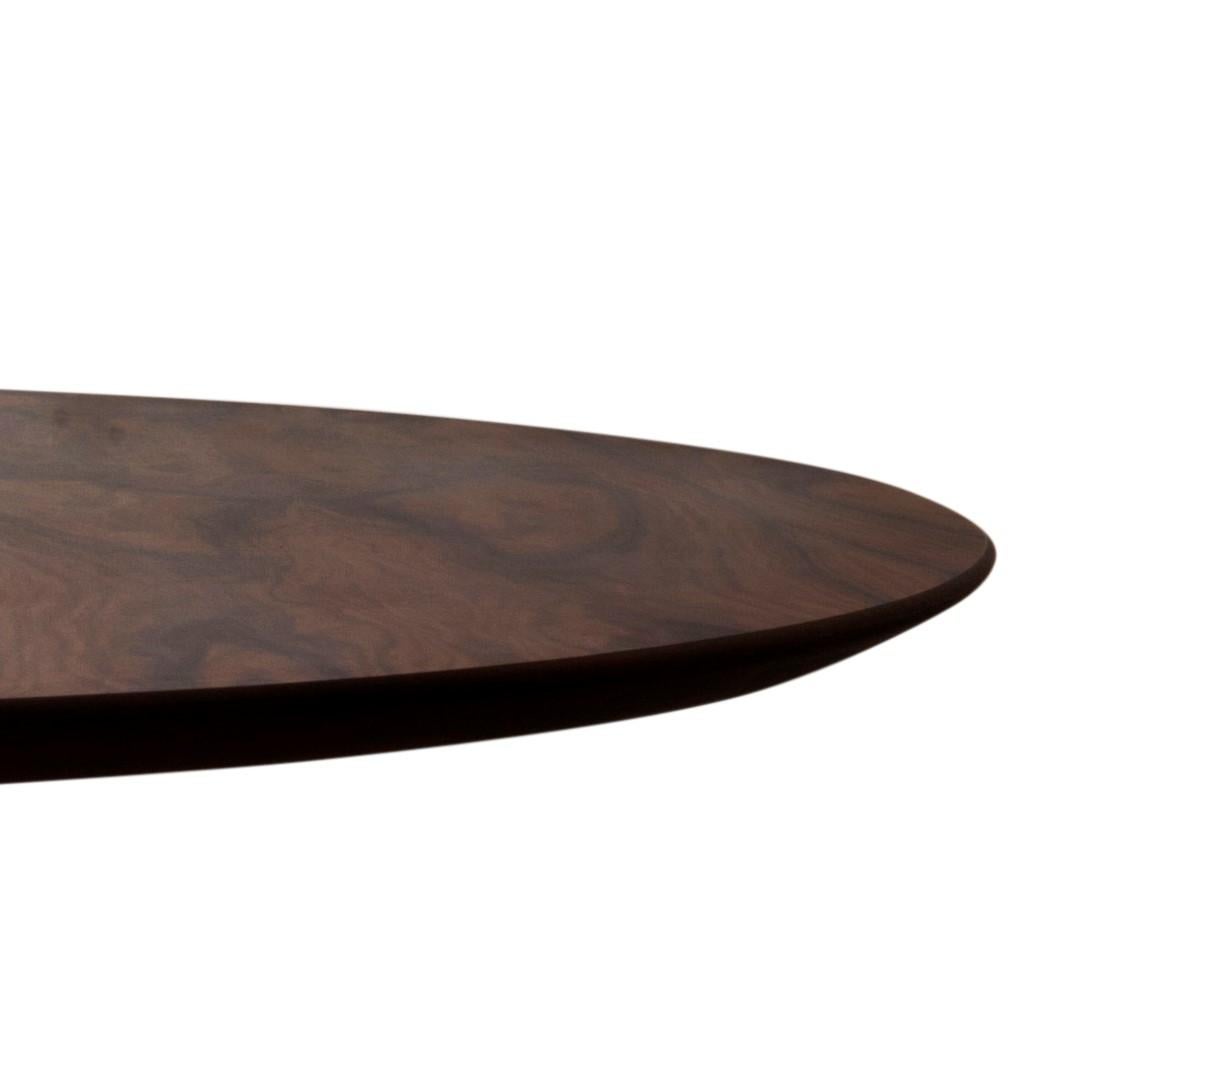 To create the Round Rods Dining Table, Alessandra Delgado was inspired by a childhood memory, the game of 